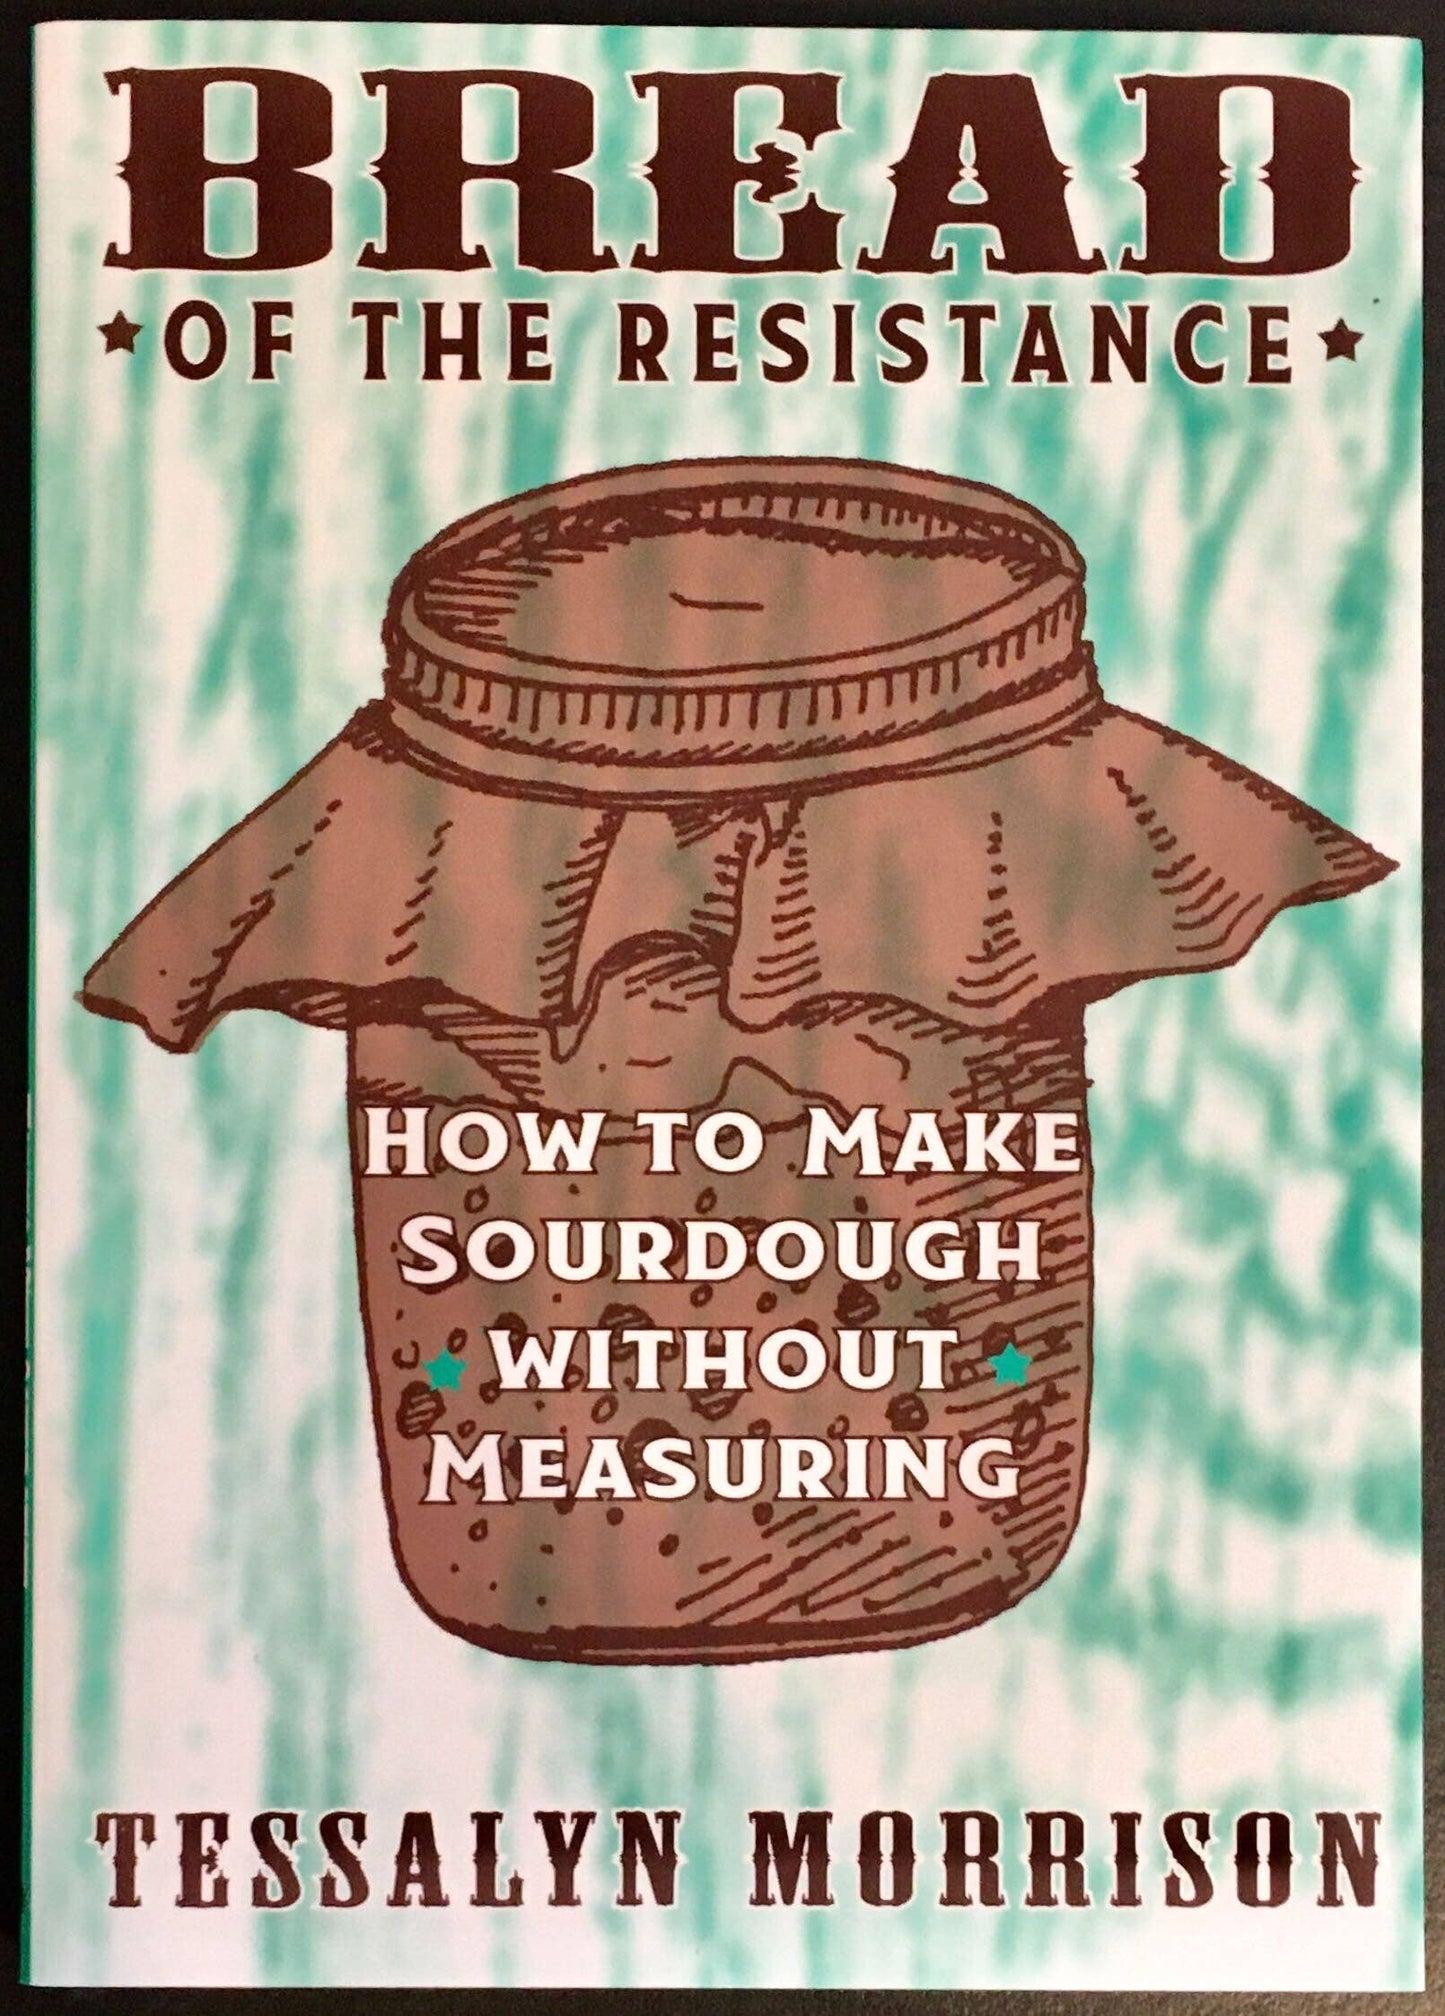 Bread of the Resistance: Make Sourdough without Measuring